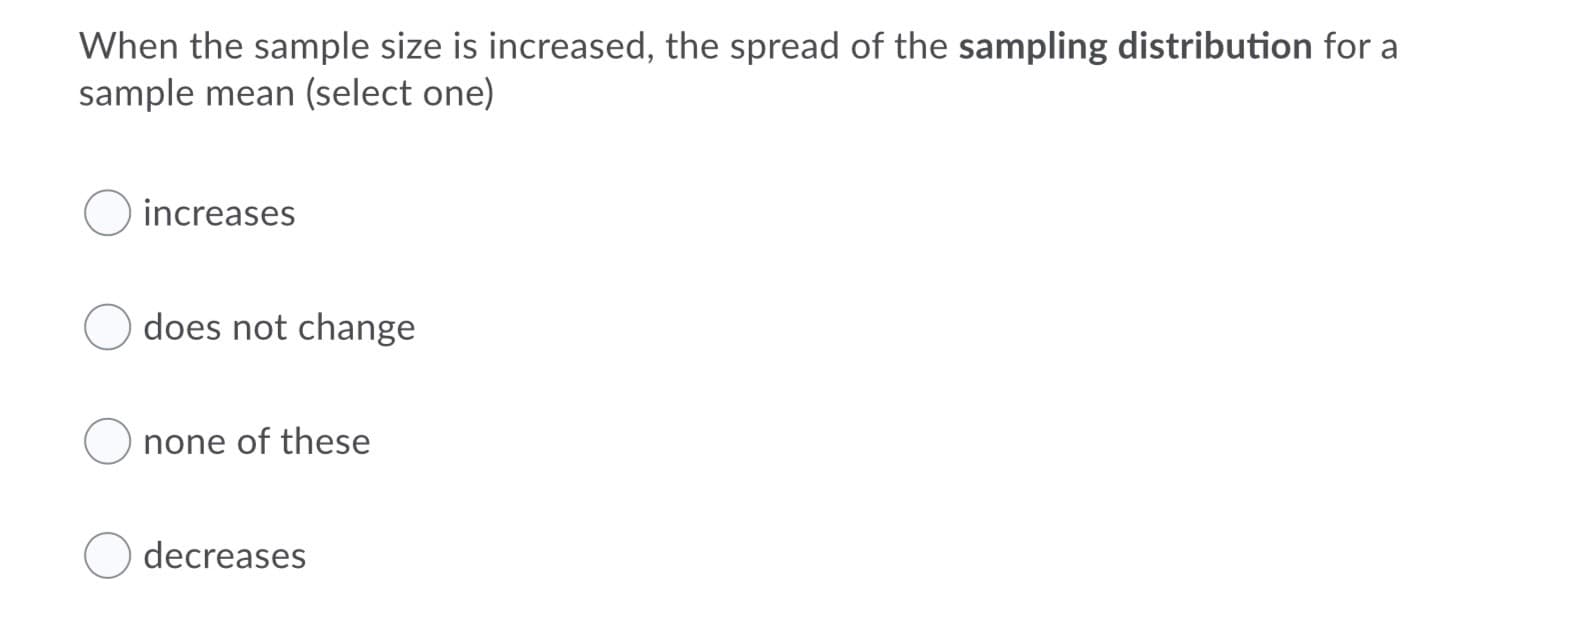 When the sample size is increased, the spread of the sampling distribution for a
sample mean (select one)
increases
does not change
none of these
decreases
